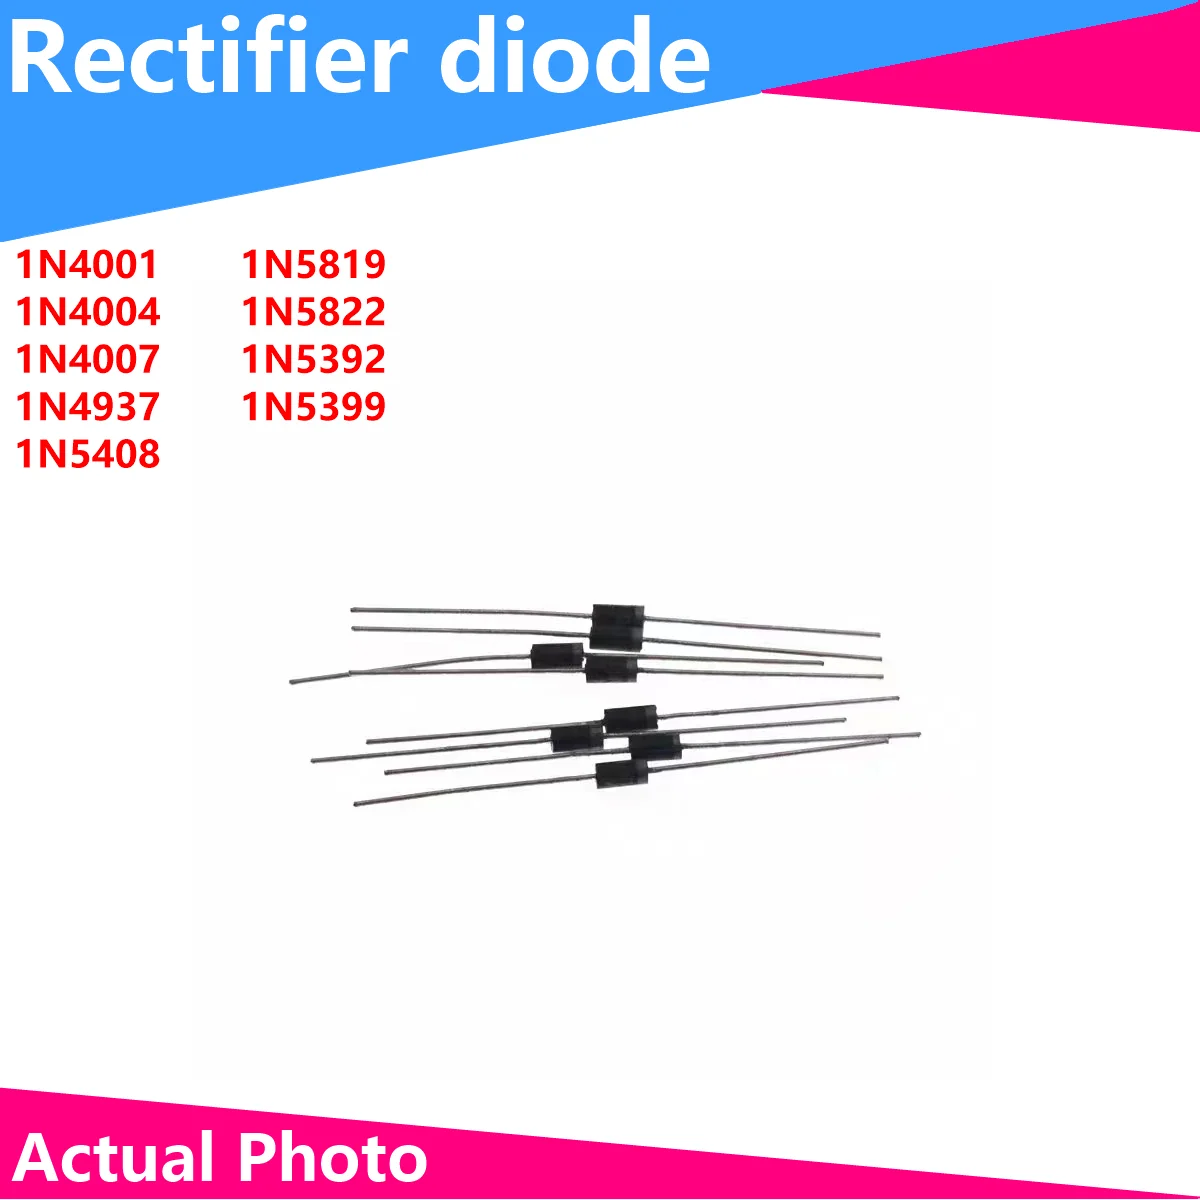 100/50PCS DIODE 1N4001 1N4004 1N4007 1N4937 1N5408 1N5819 1N5822 1N5392 1N5399 100pcs lot 1n4148 1n4007 1n5819 1n5408 1n5822 1n5399 fr107 fr207 diode assorted kit electronic components package 8values 100pcs